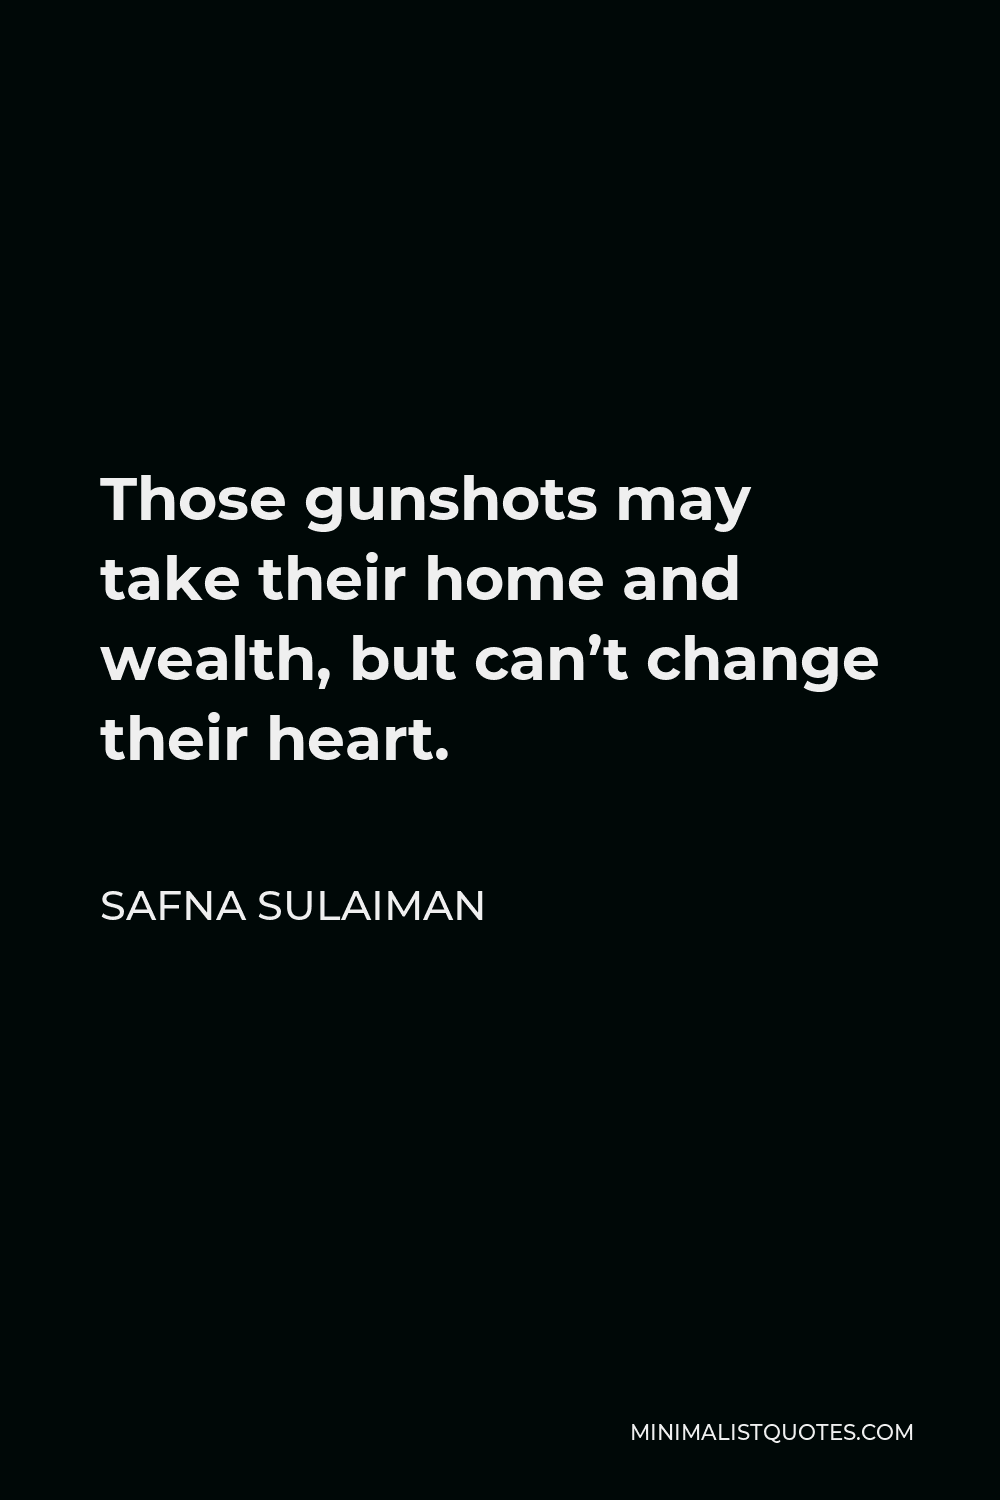 Safna Sulaiman Quote - Those gunshots may take their home and wealth, but can’t change their heart.